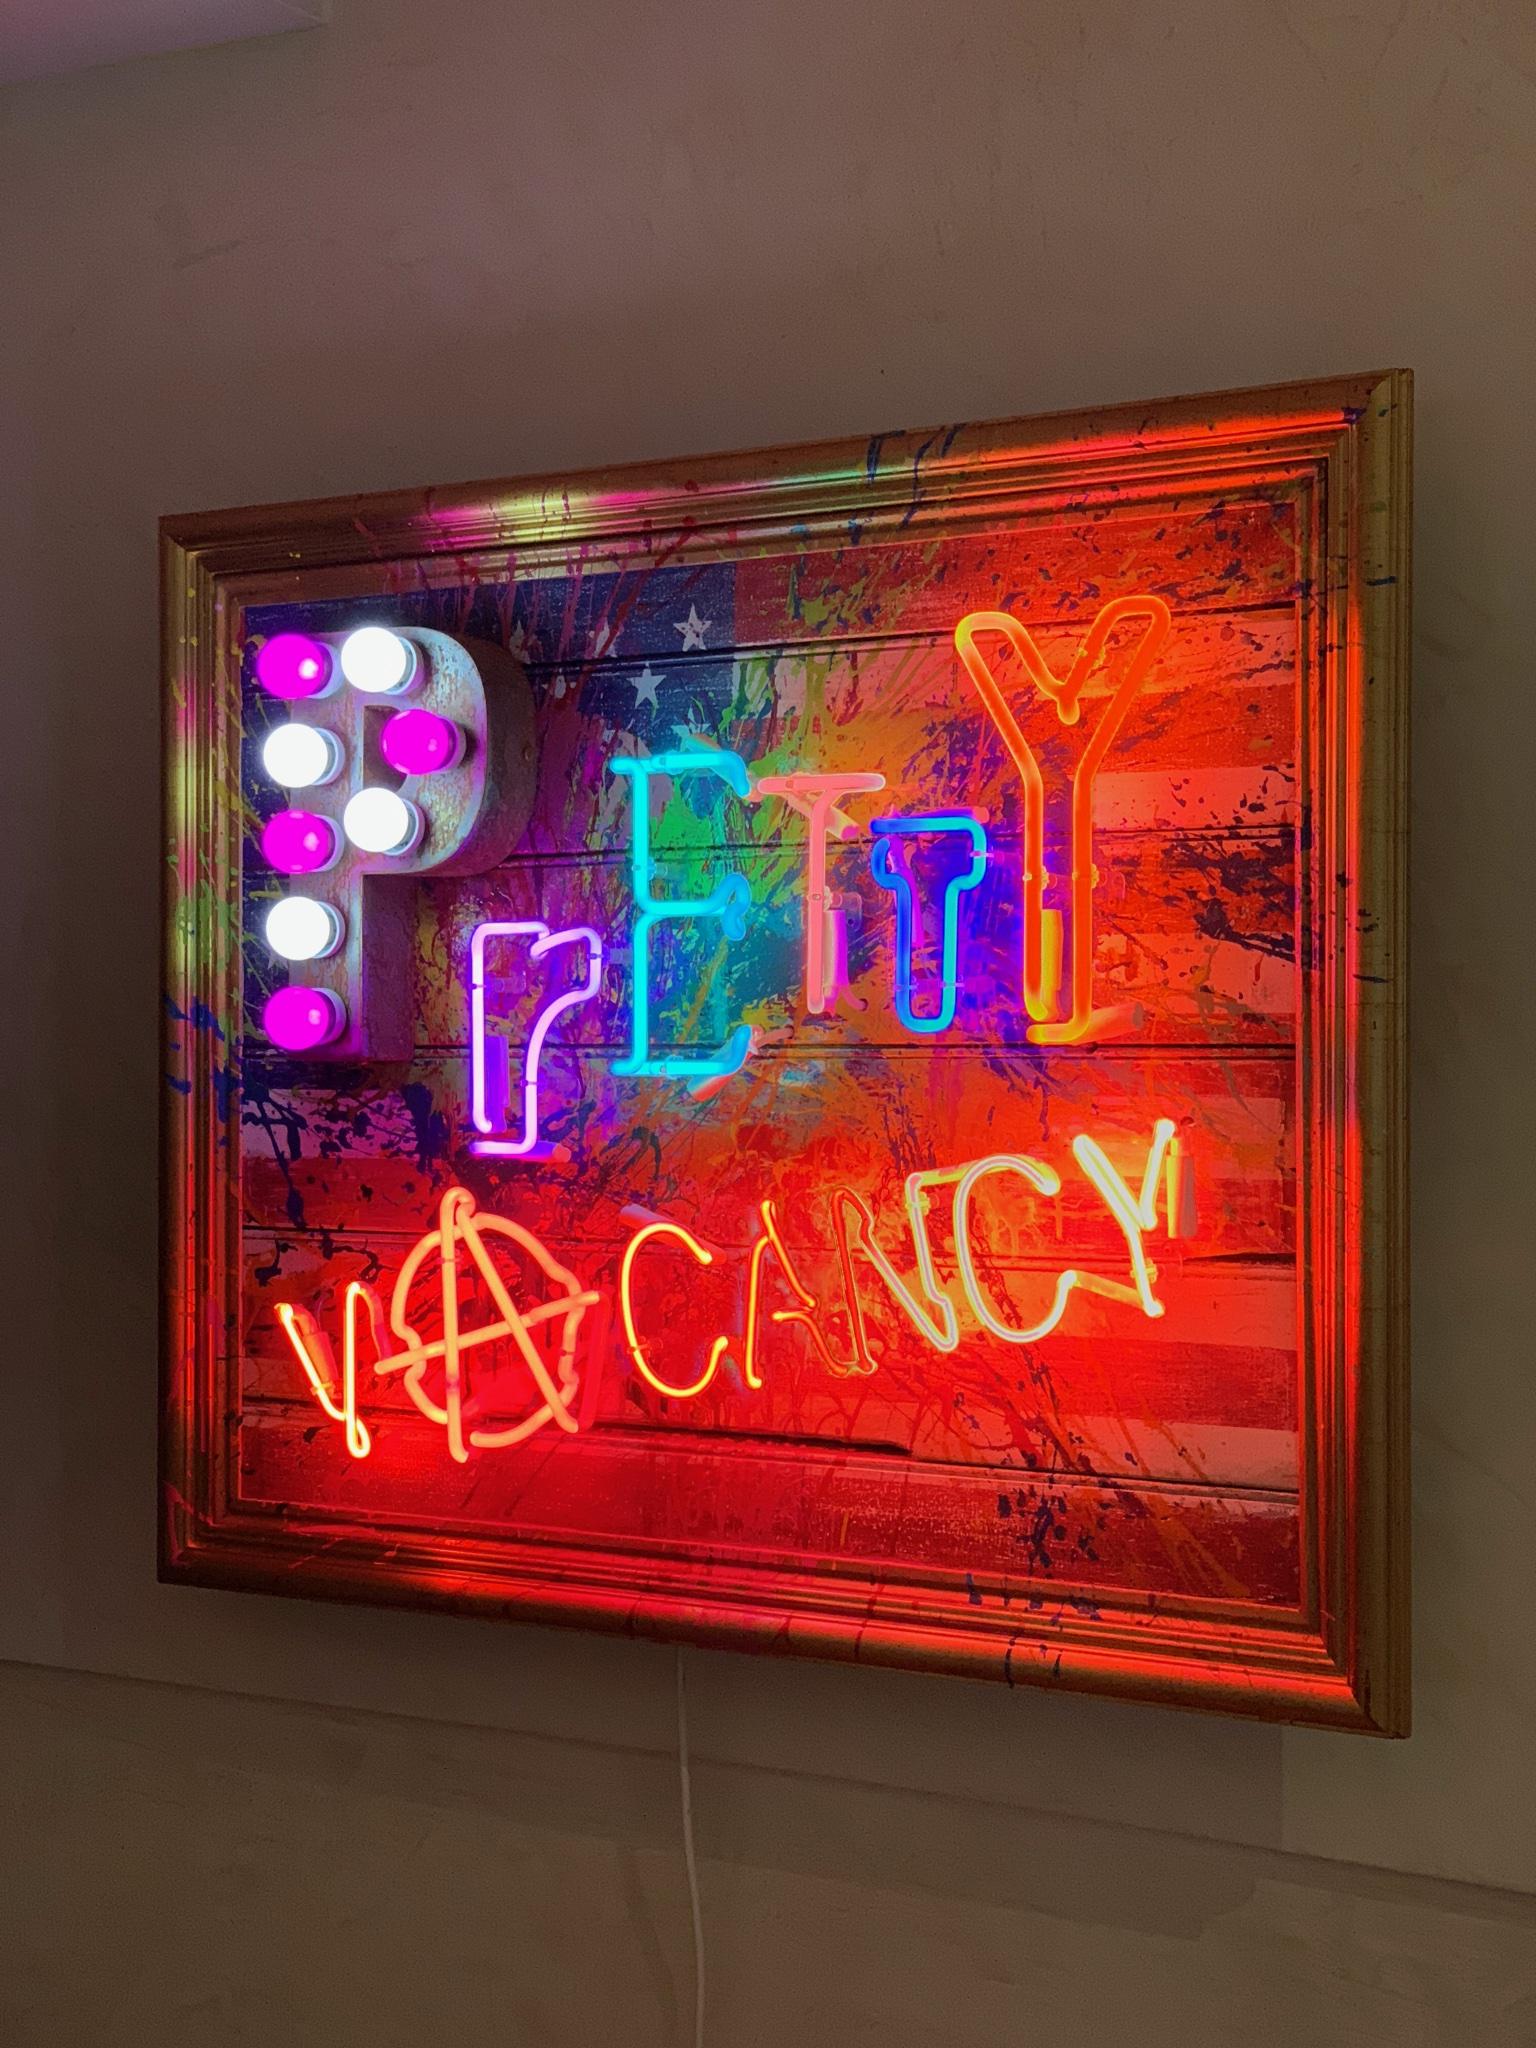 Chris Bracey
Pretty Vacancy
40 x 44 inches
Found lettering and neon text fitted to recycled wooden floor boards with hand painting
1 remaining in the edition
Signed, Numbered